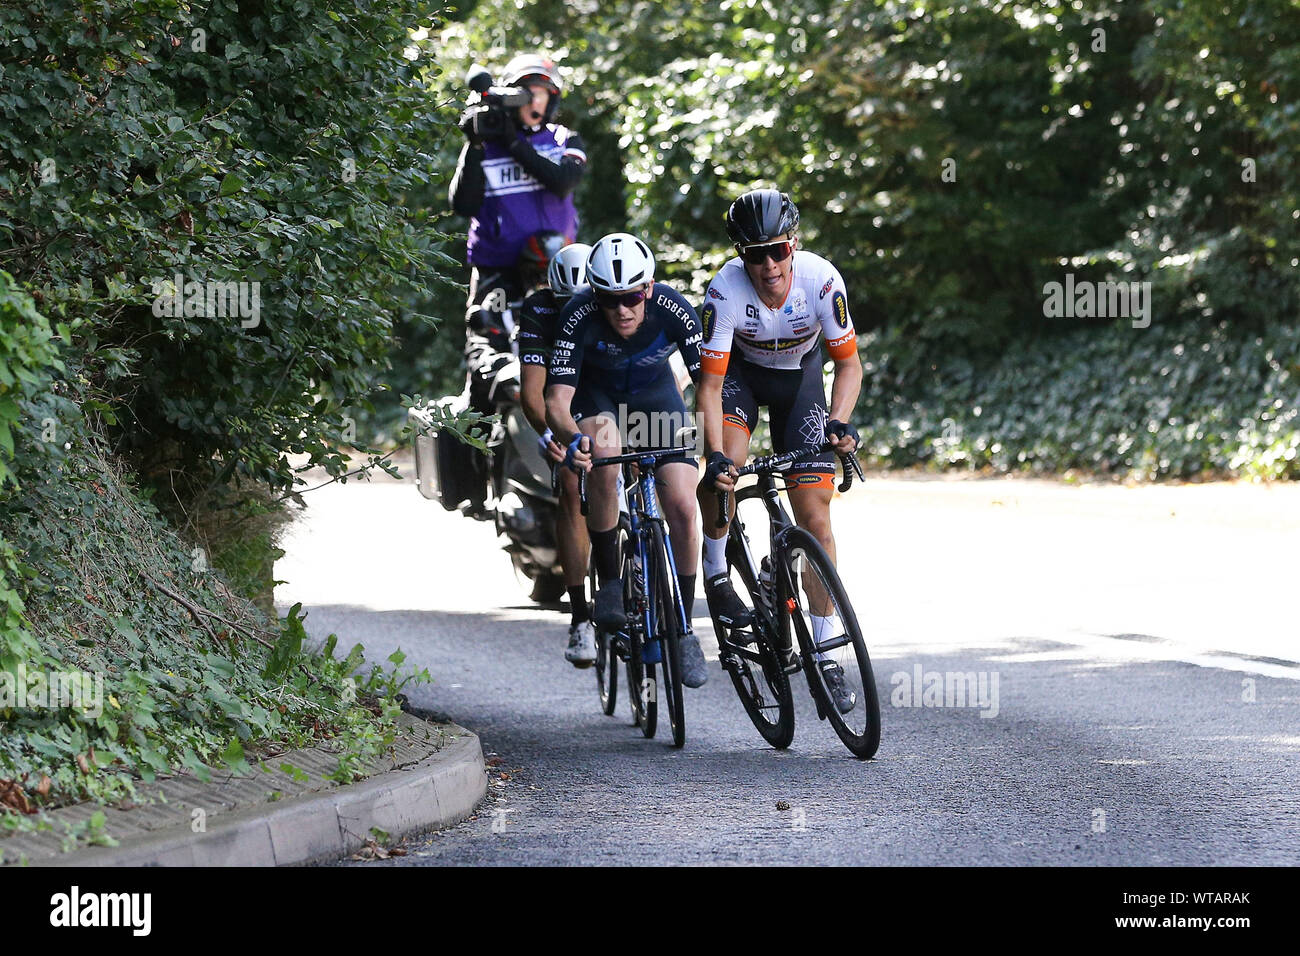 Birkenhead, UK. 11th Sep, 2019. The leaders riding up Flaybrick Hill (Upton Road) during the OVO Energy Tour of Britain 2019, stage5, Wirral Stage, Birkenhead to Birkenhead on Wednesday 11th September 2019. picture by Chris Stading/Andrew Orchard sports photography/Alamy Live News Credit: Andrew Orchard sports photography/Alamy Live News Stock Photo